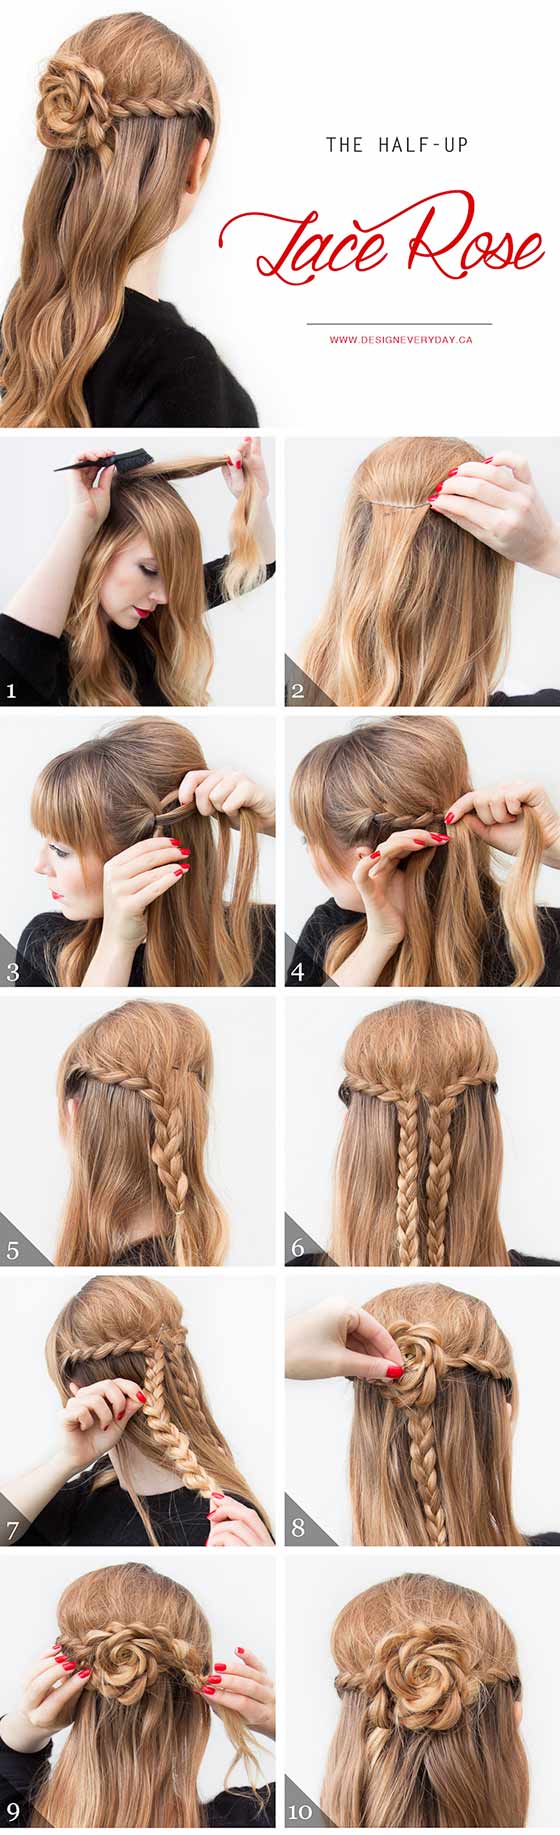 Half-up lace rose braided hairstyle for long hair